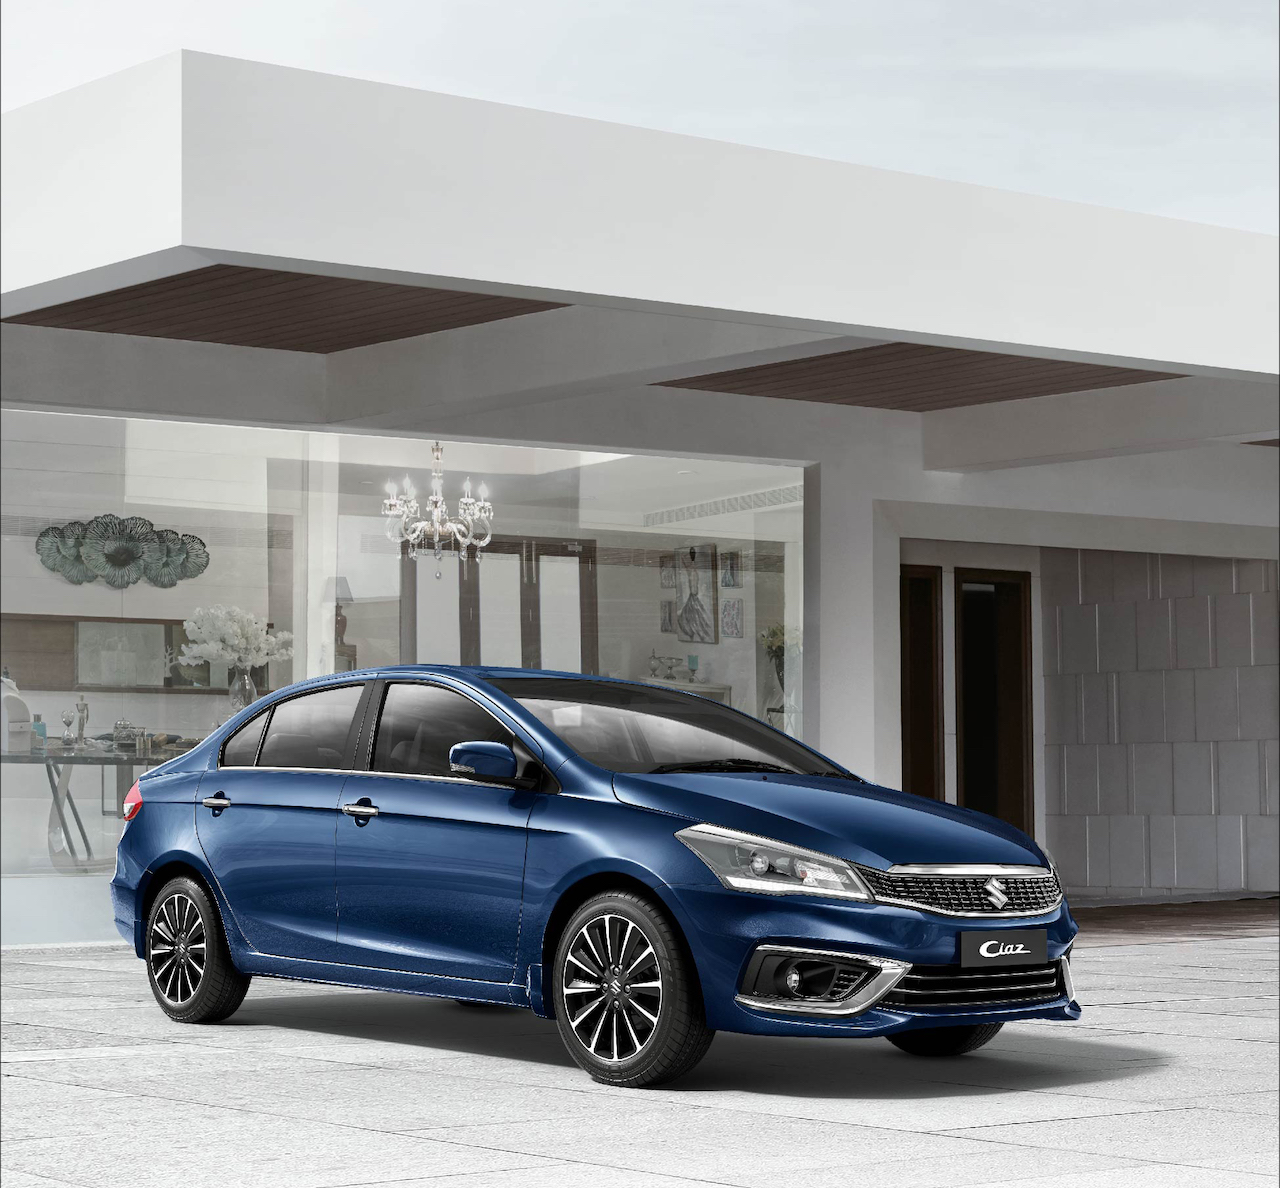 New Suzuki Ciaz heading to South Africa in Q1 2019